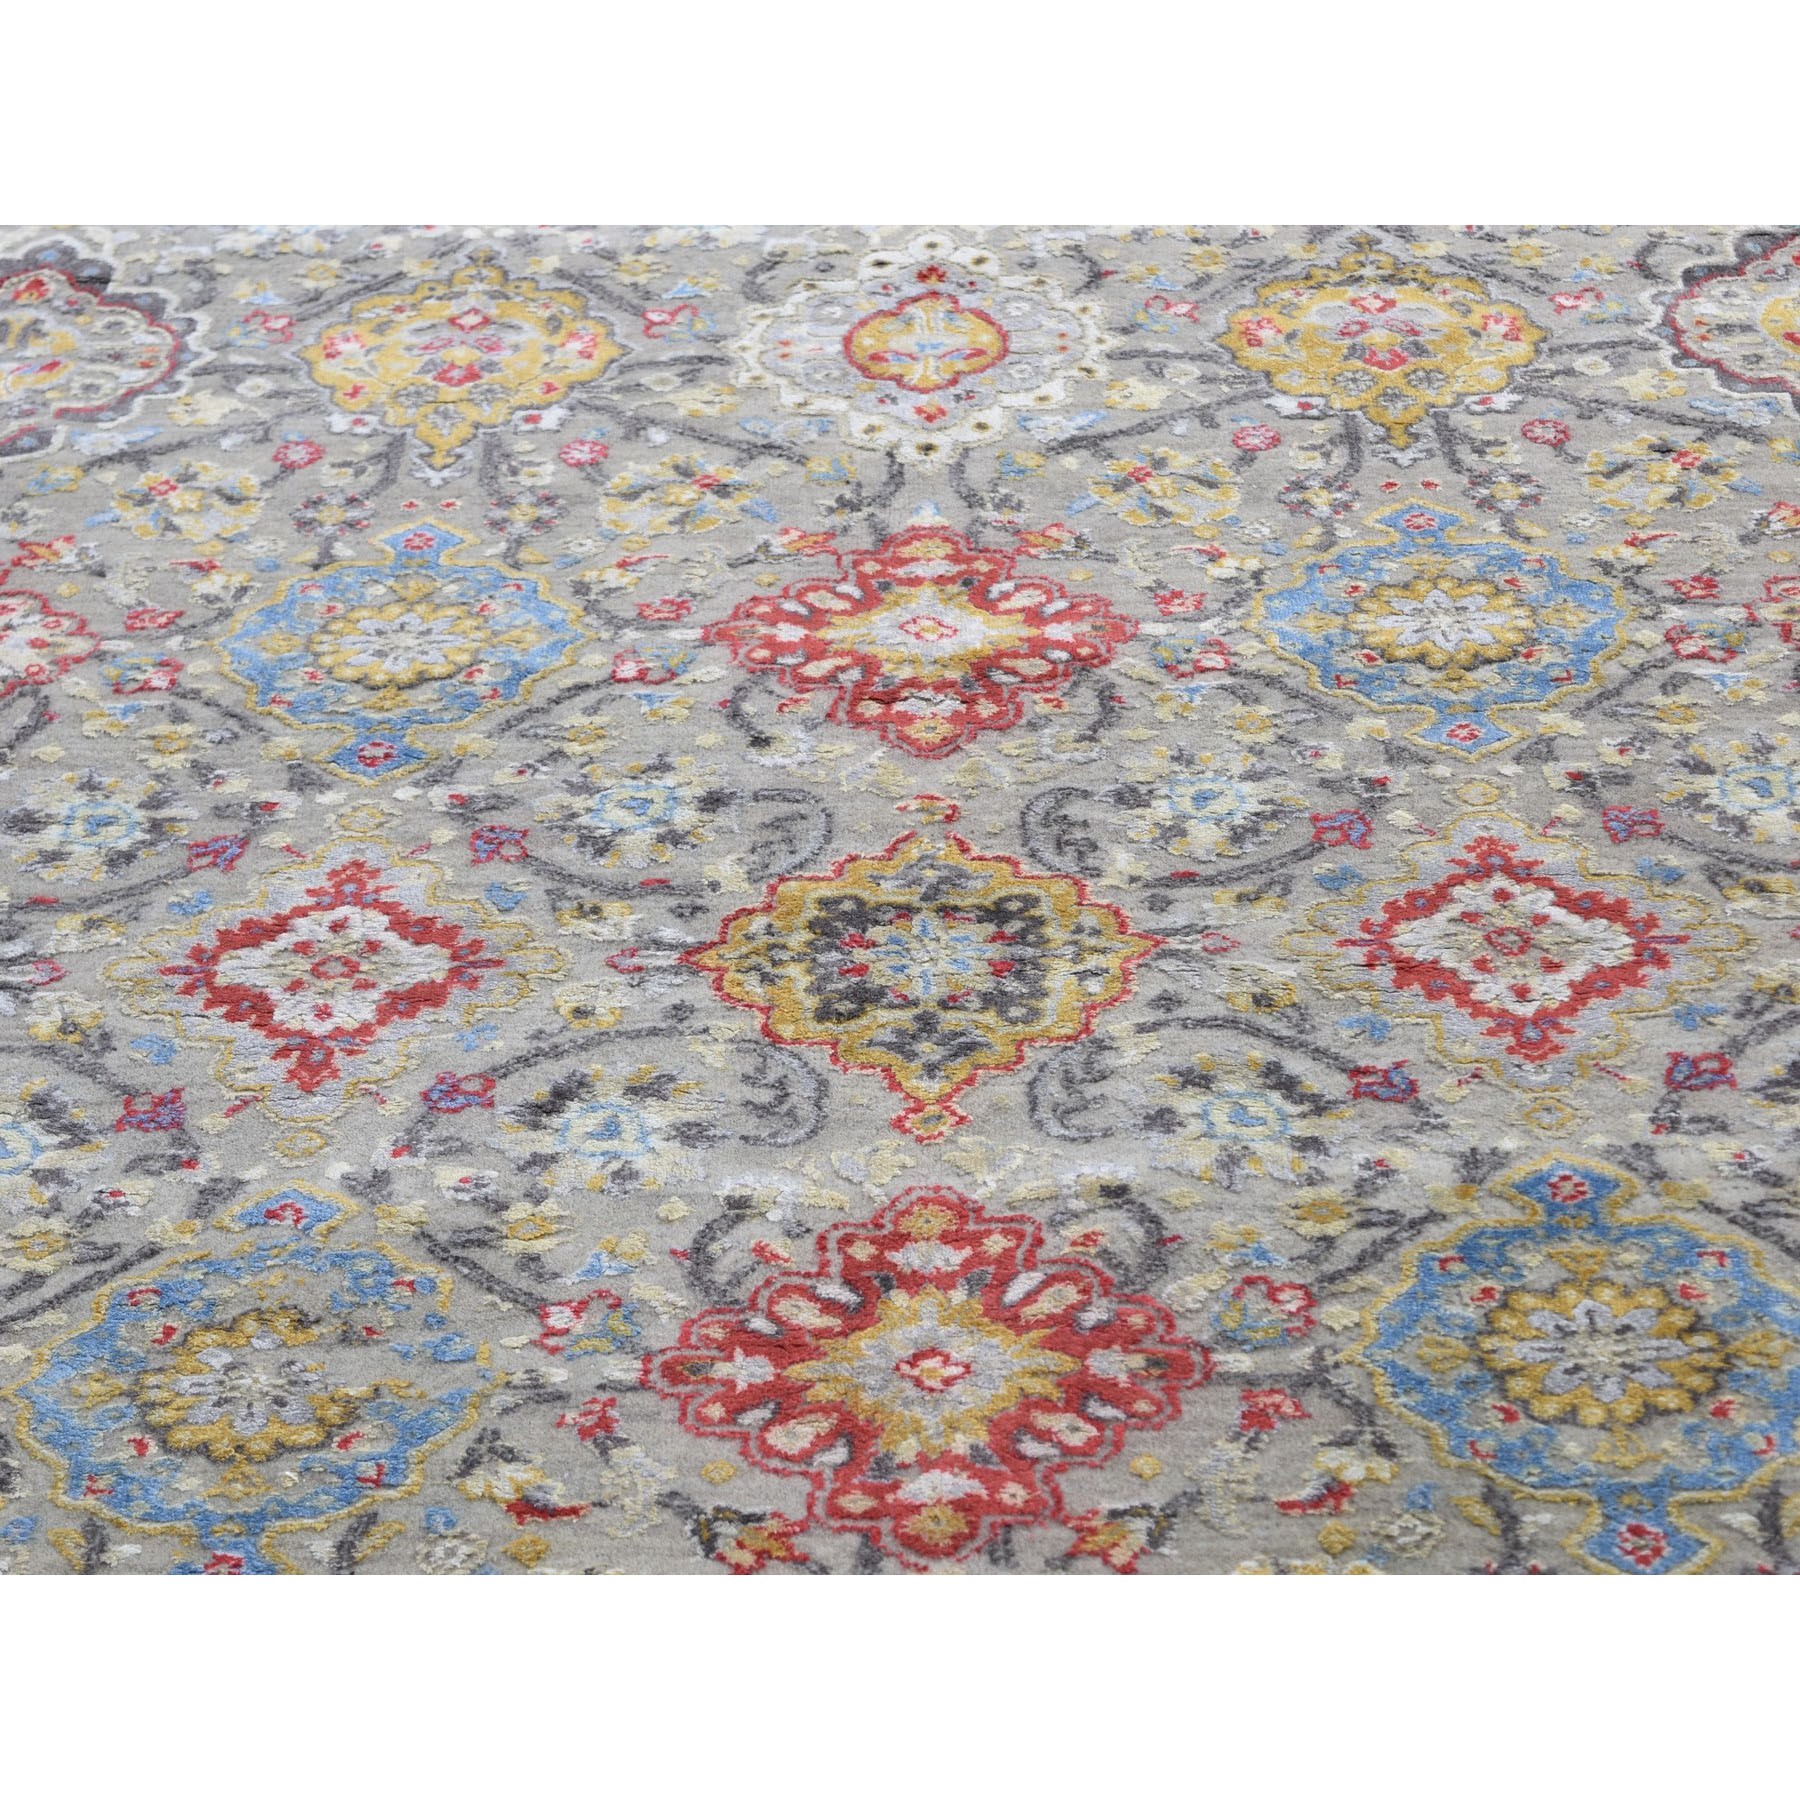 10'3"x10'3" Square THE SUNSET ROSETTES Wool And Pure Silk Hand Woven Oriental Rug 